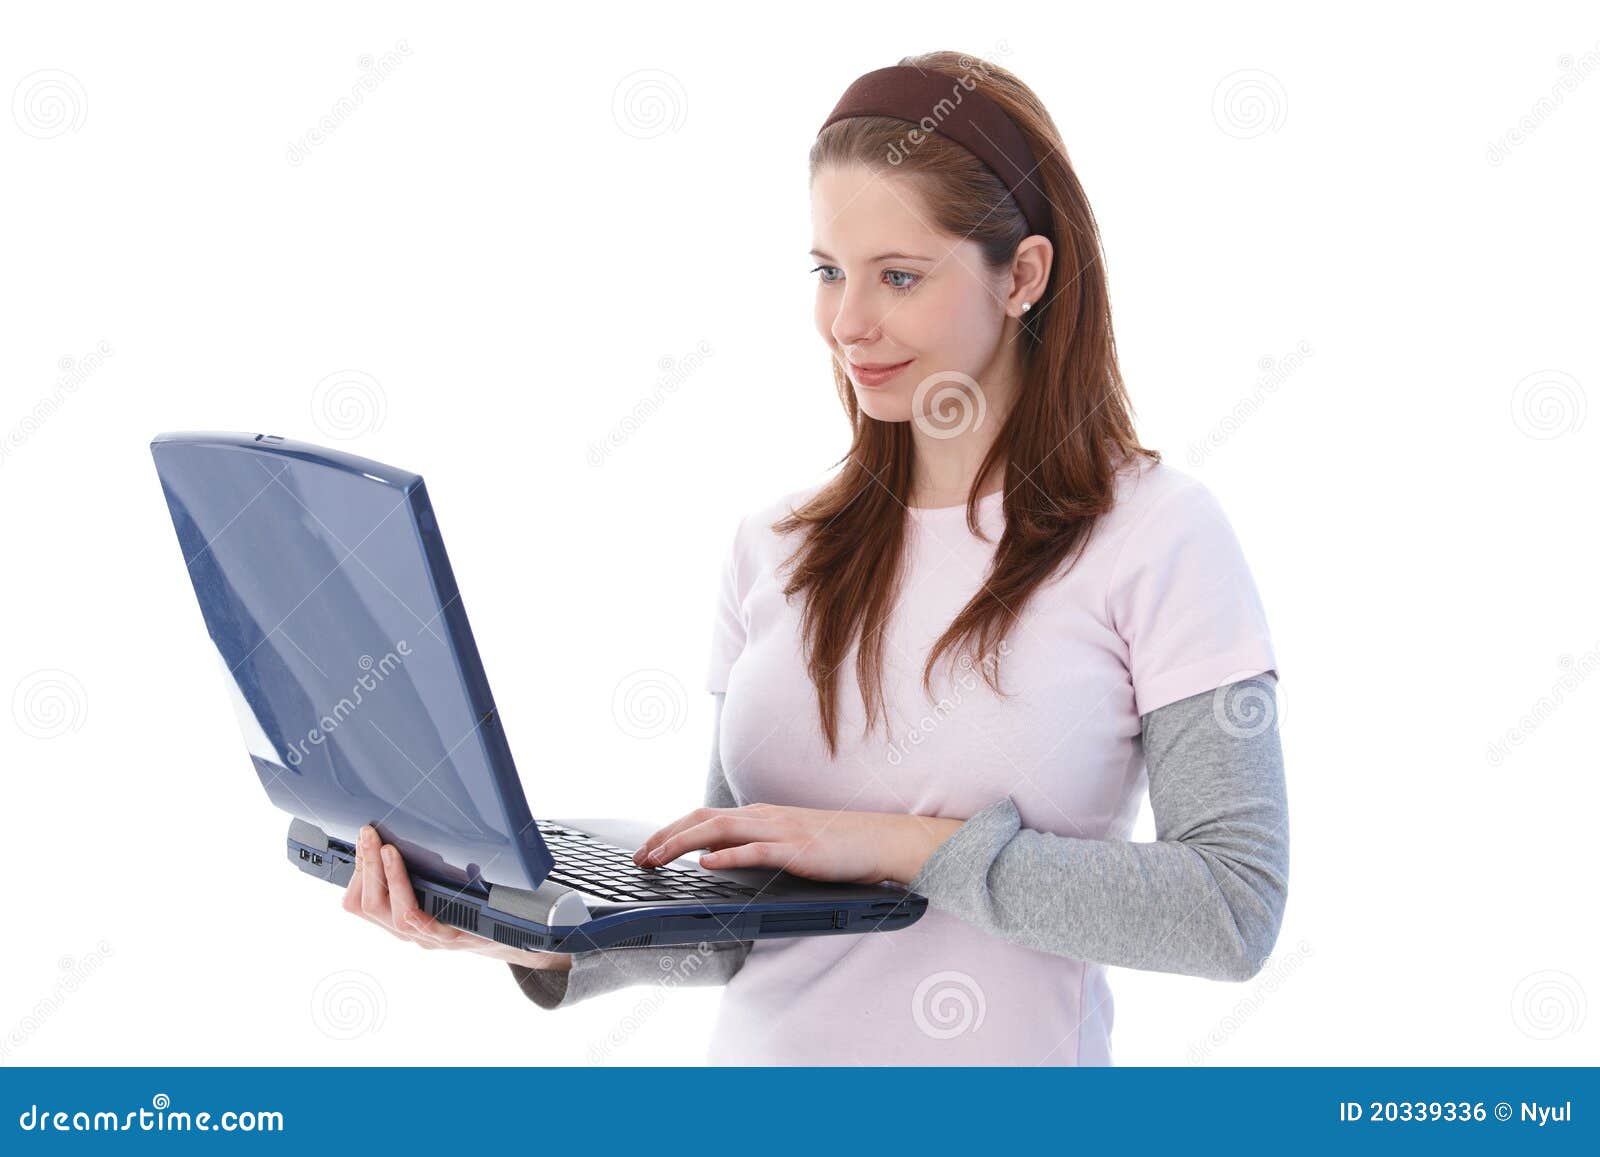 College Student Using Laptop Smiling Royalty Free Stock Image - Image: 20339336